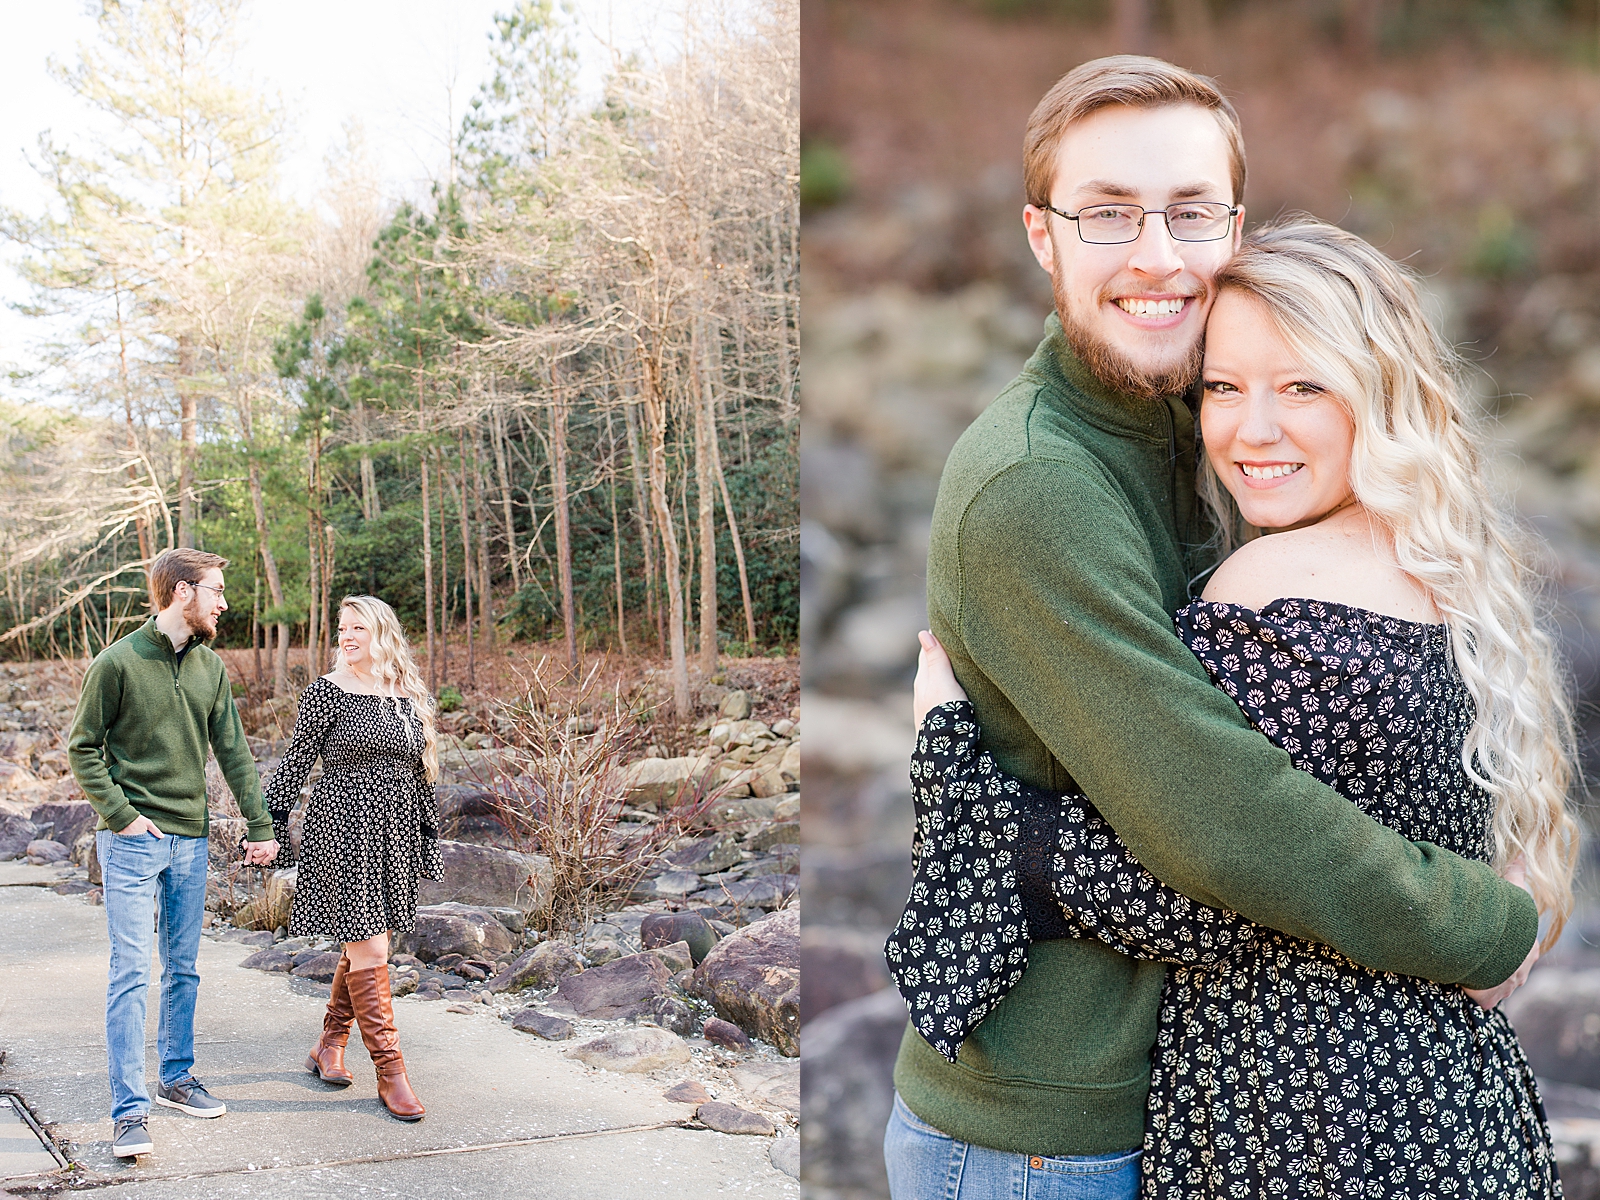 Ocoee River Engagement Session Cody and Haley walking smiling at each other and smiling at the camera photos